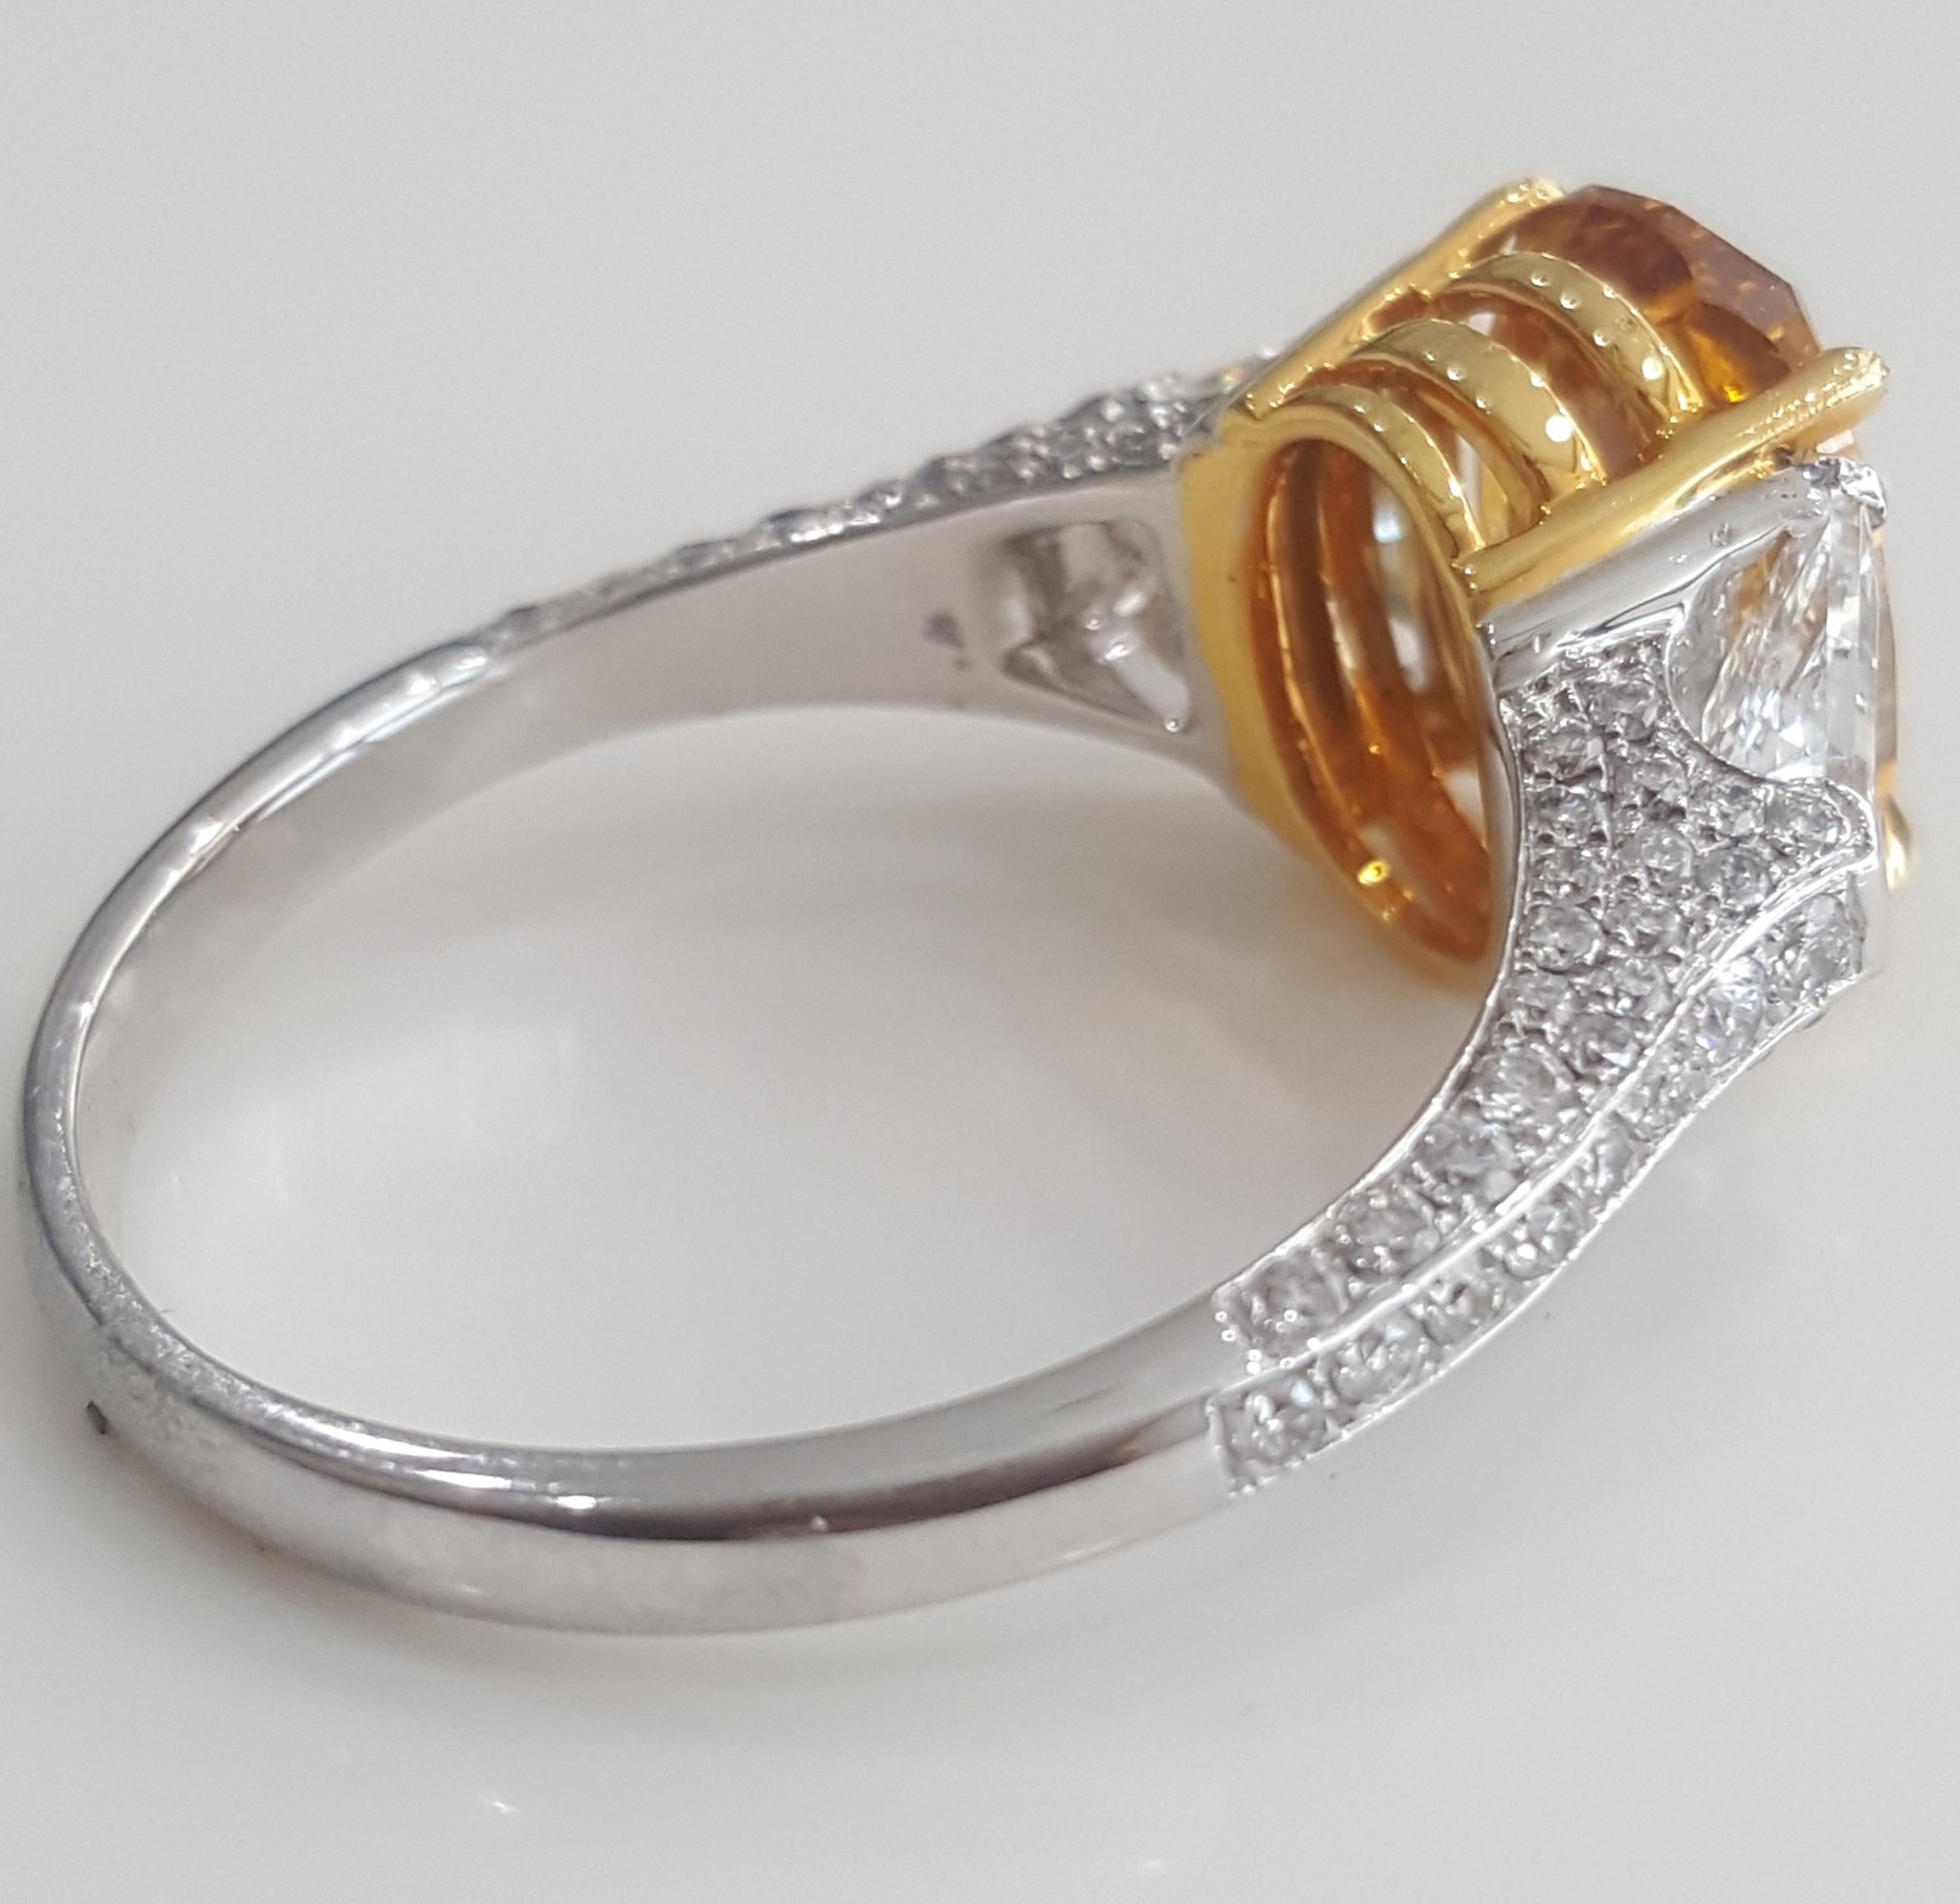 Contemporary GIA 4.43 Carat Natural Fancy Deep Orange Yellow Oval And White Diamond Ring.  For Sale